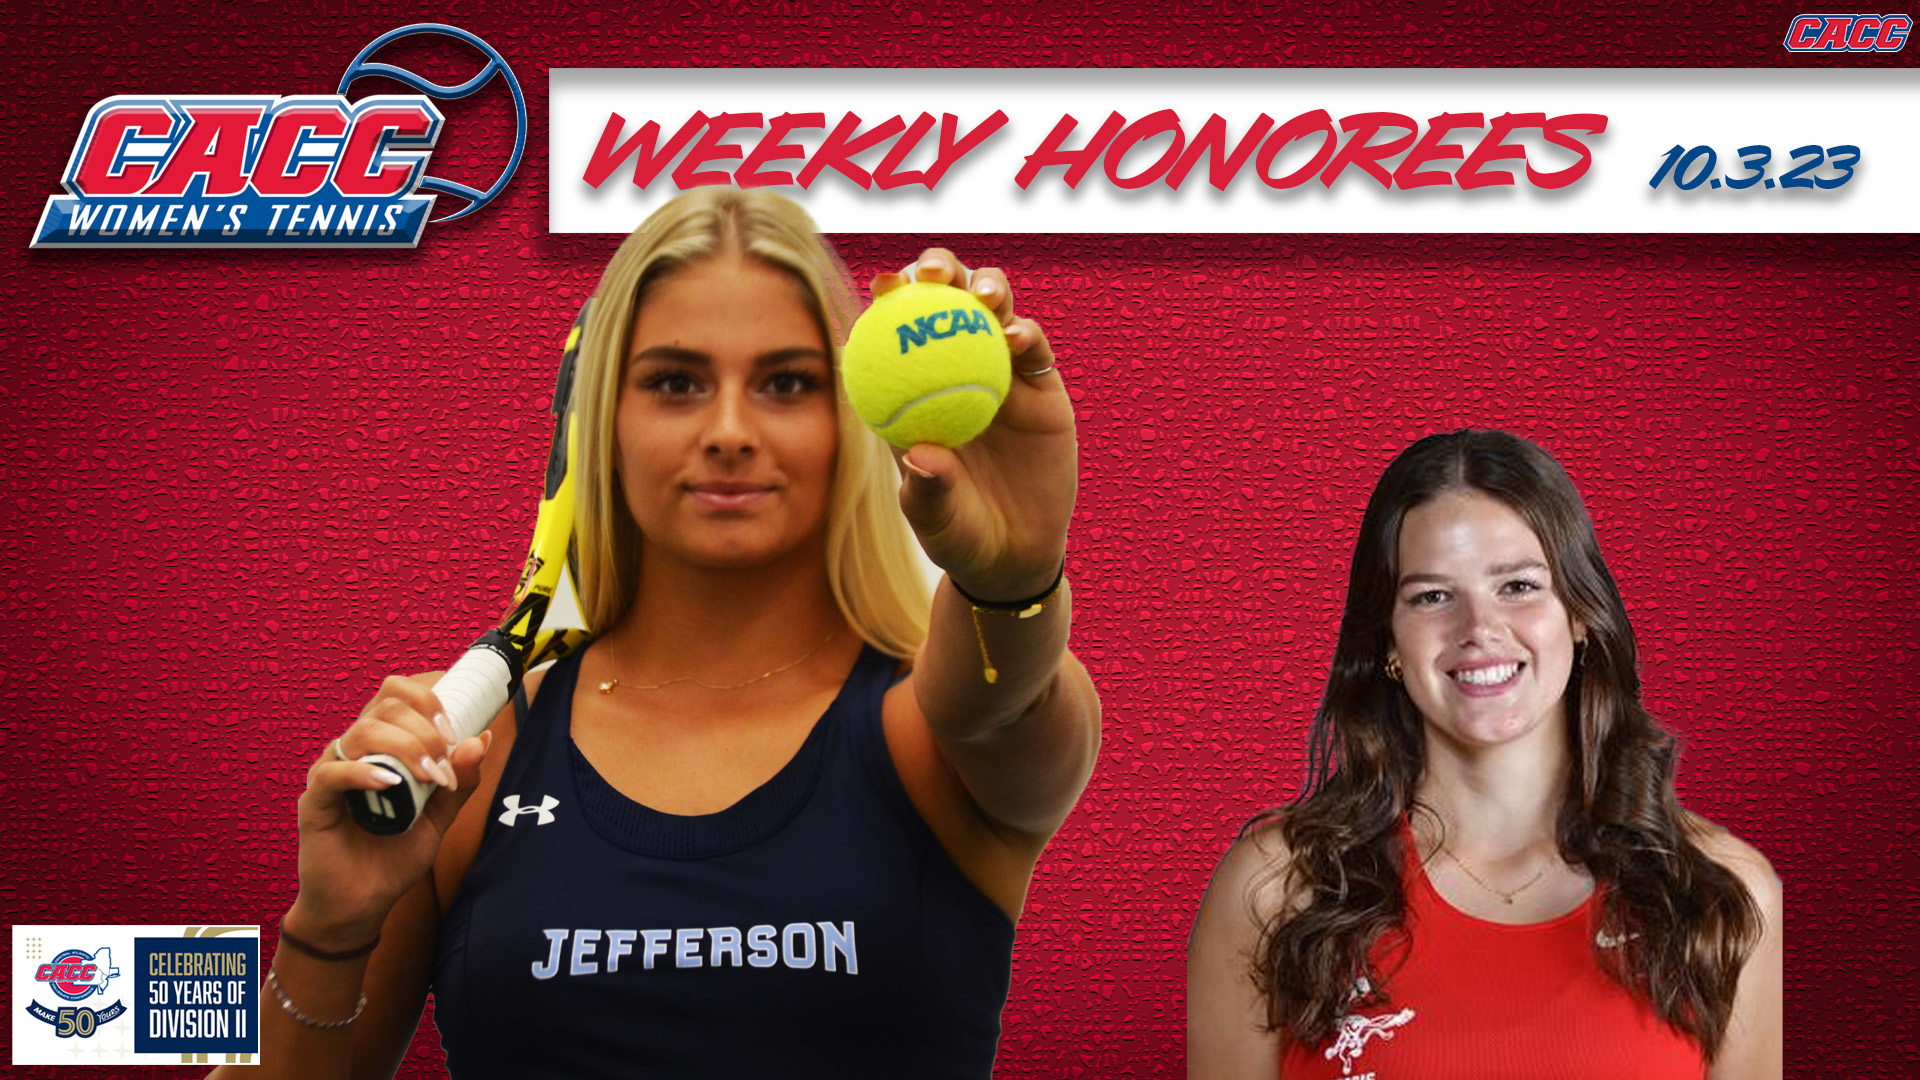 CACC Women's Tennis Weekly Honorees (10-3-23)